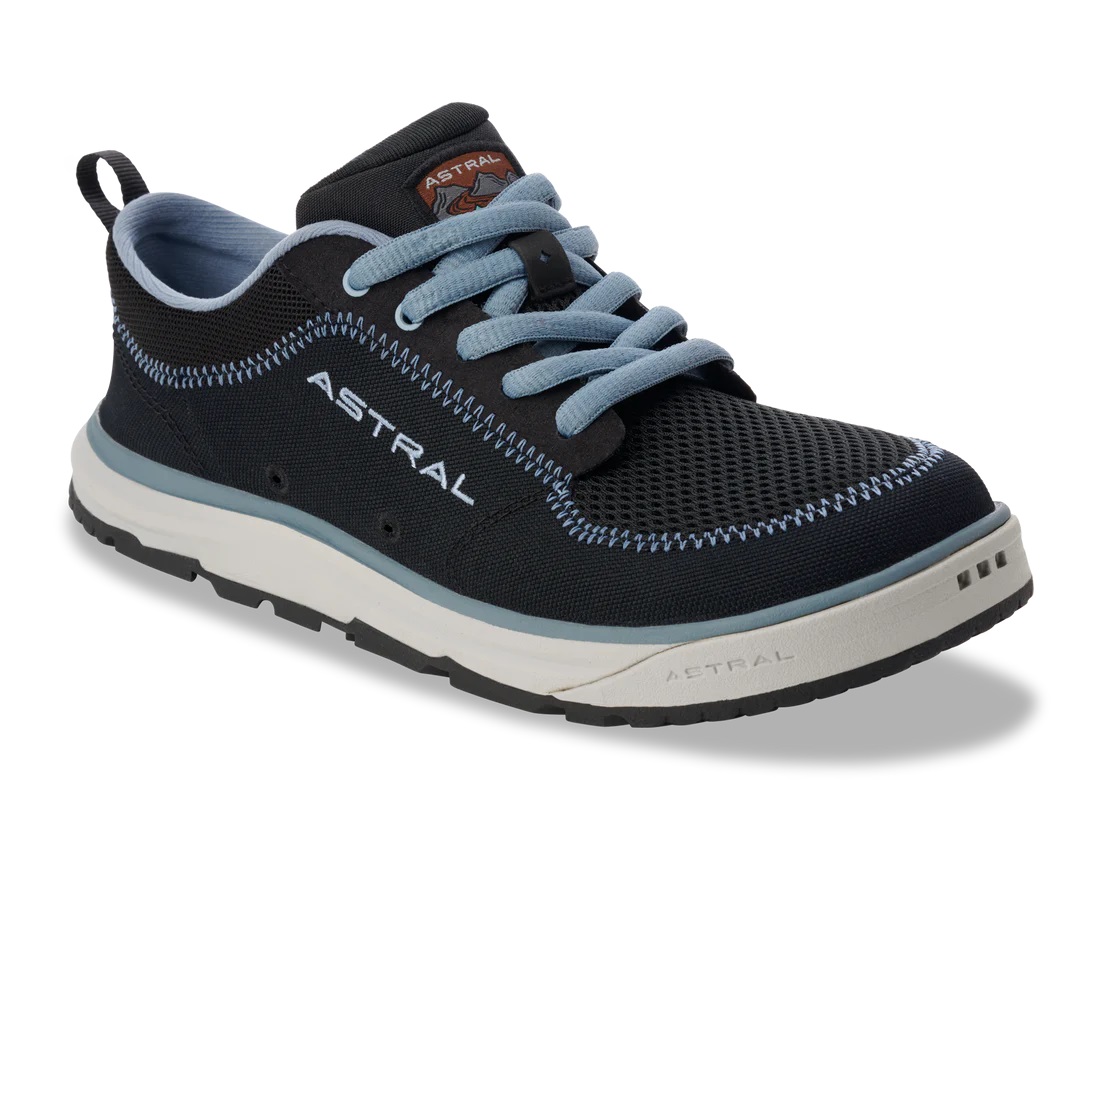 Astral Footwear Brewerss Onyx Black Angled front top view